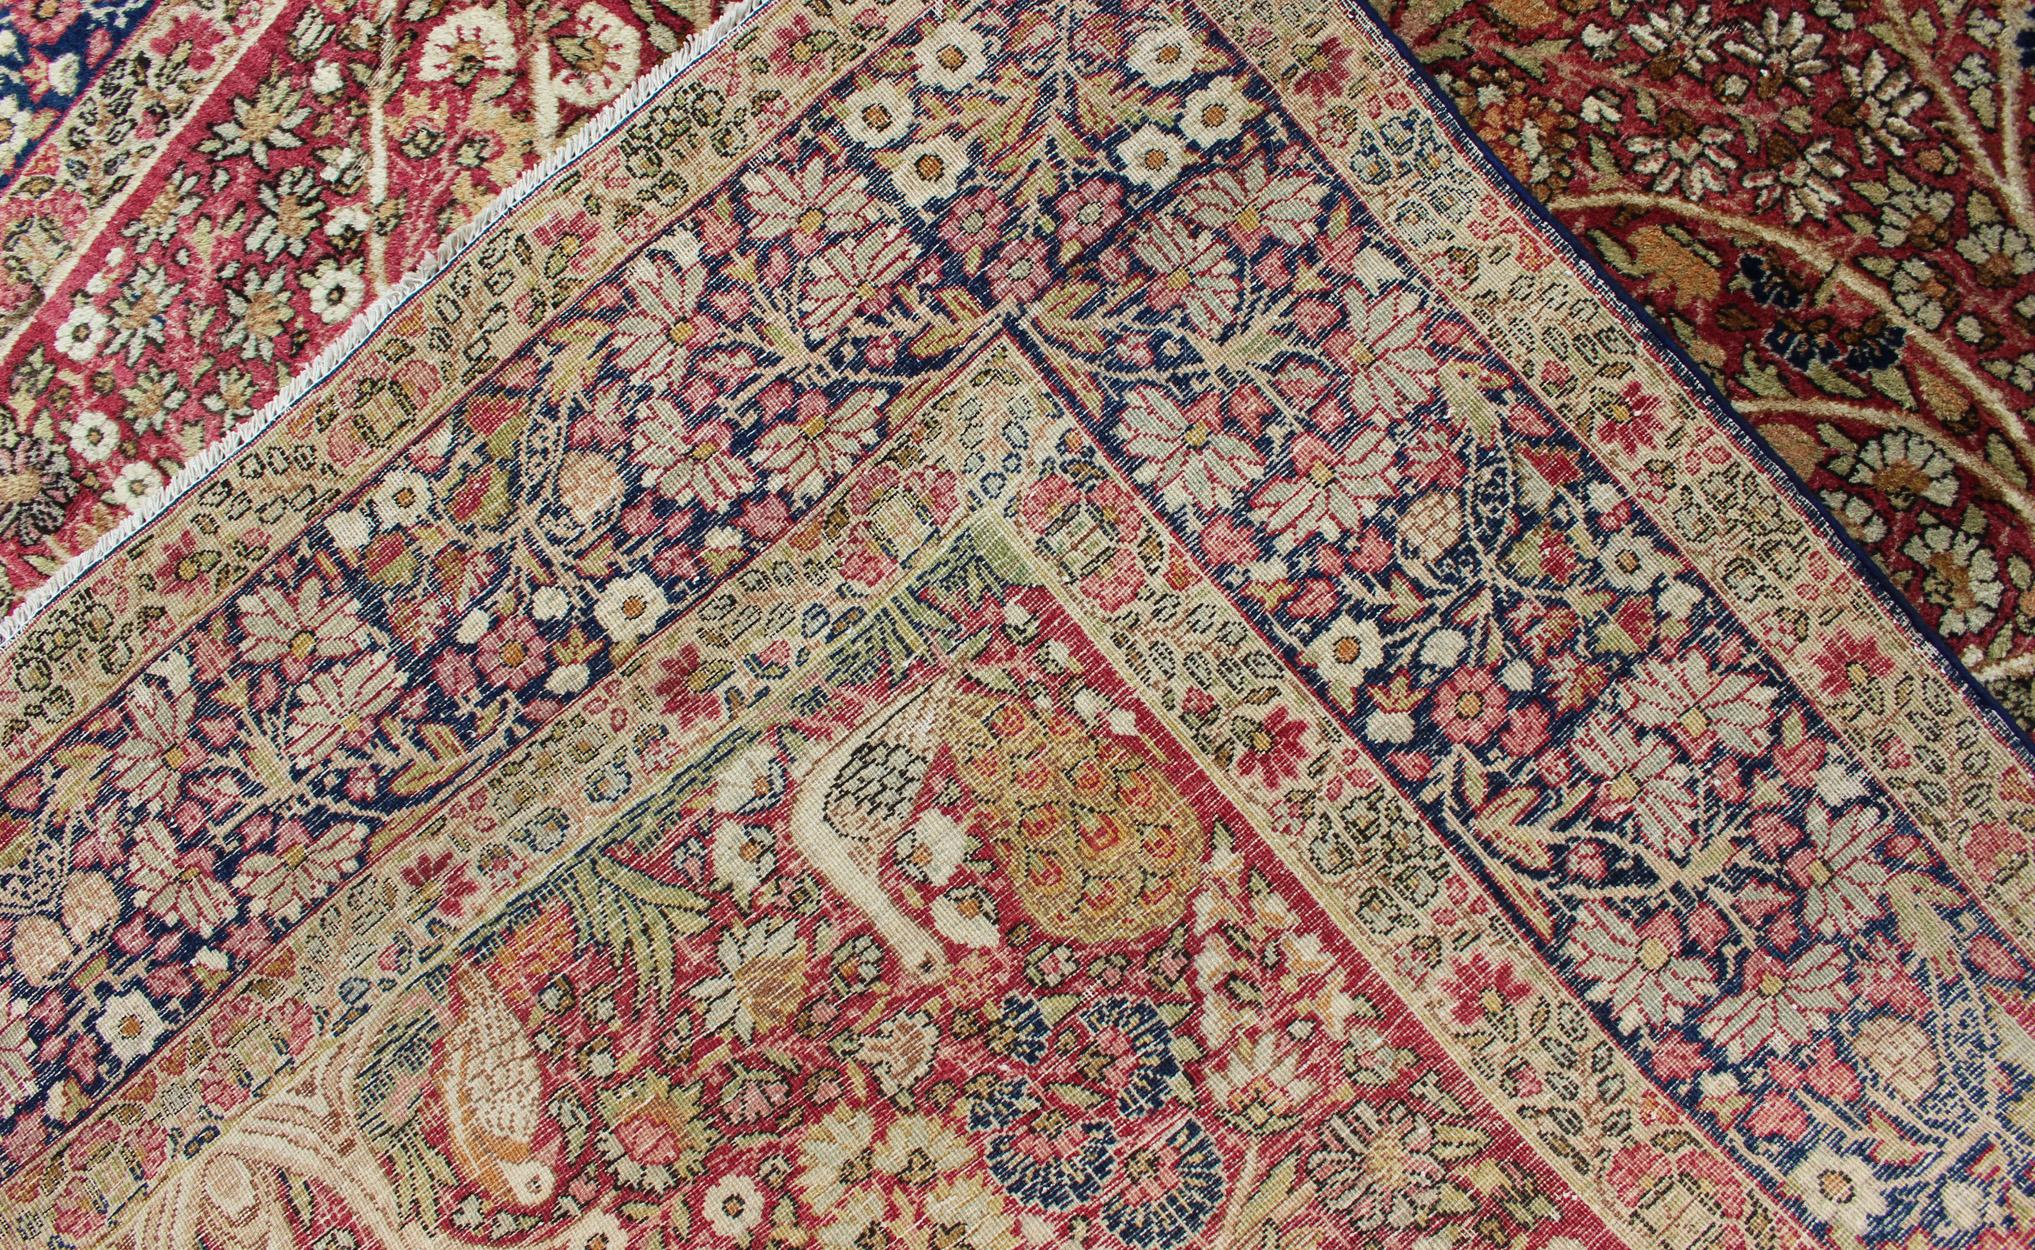 Very Fine Antique Persian Lavar Kerman Rug with Intricate Floral Design  In Good Condition For Sale In Atlanta, GA